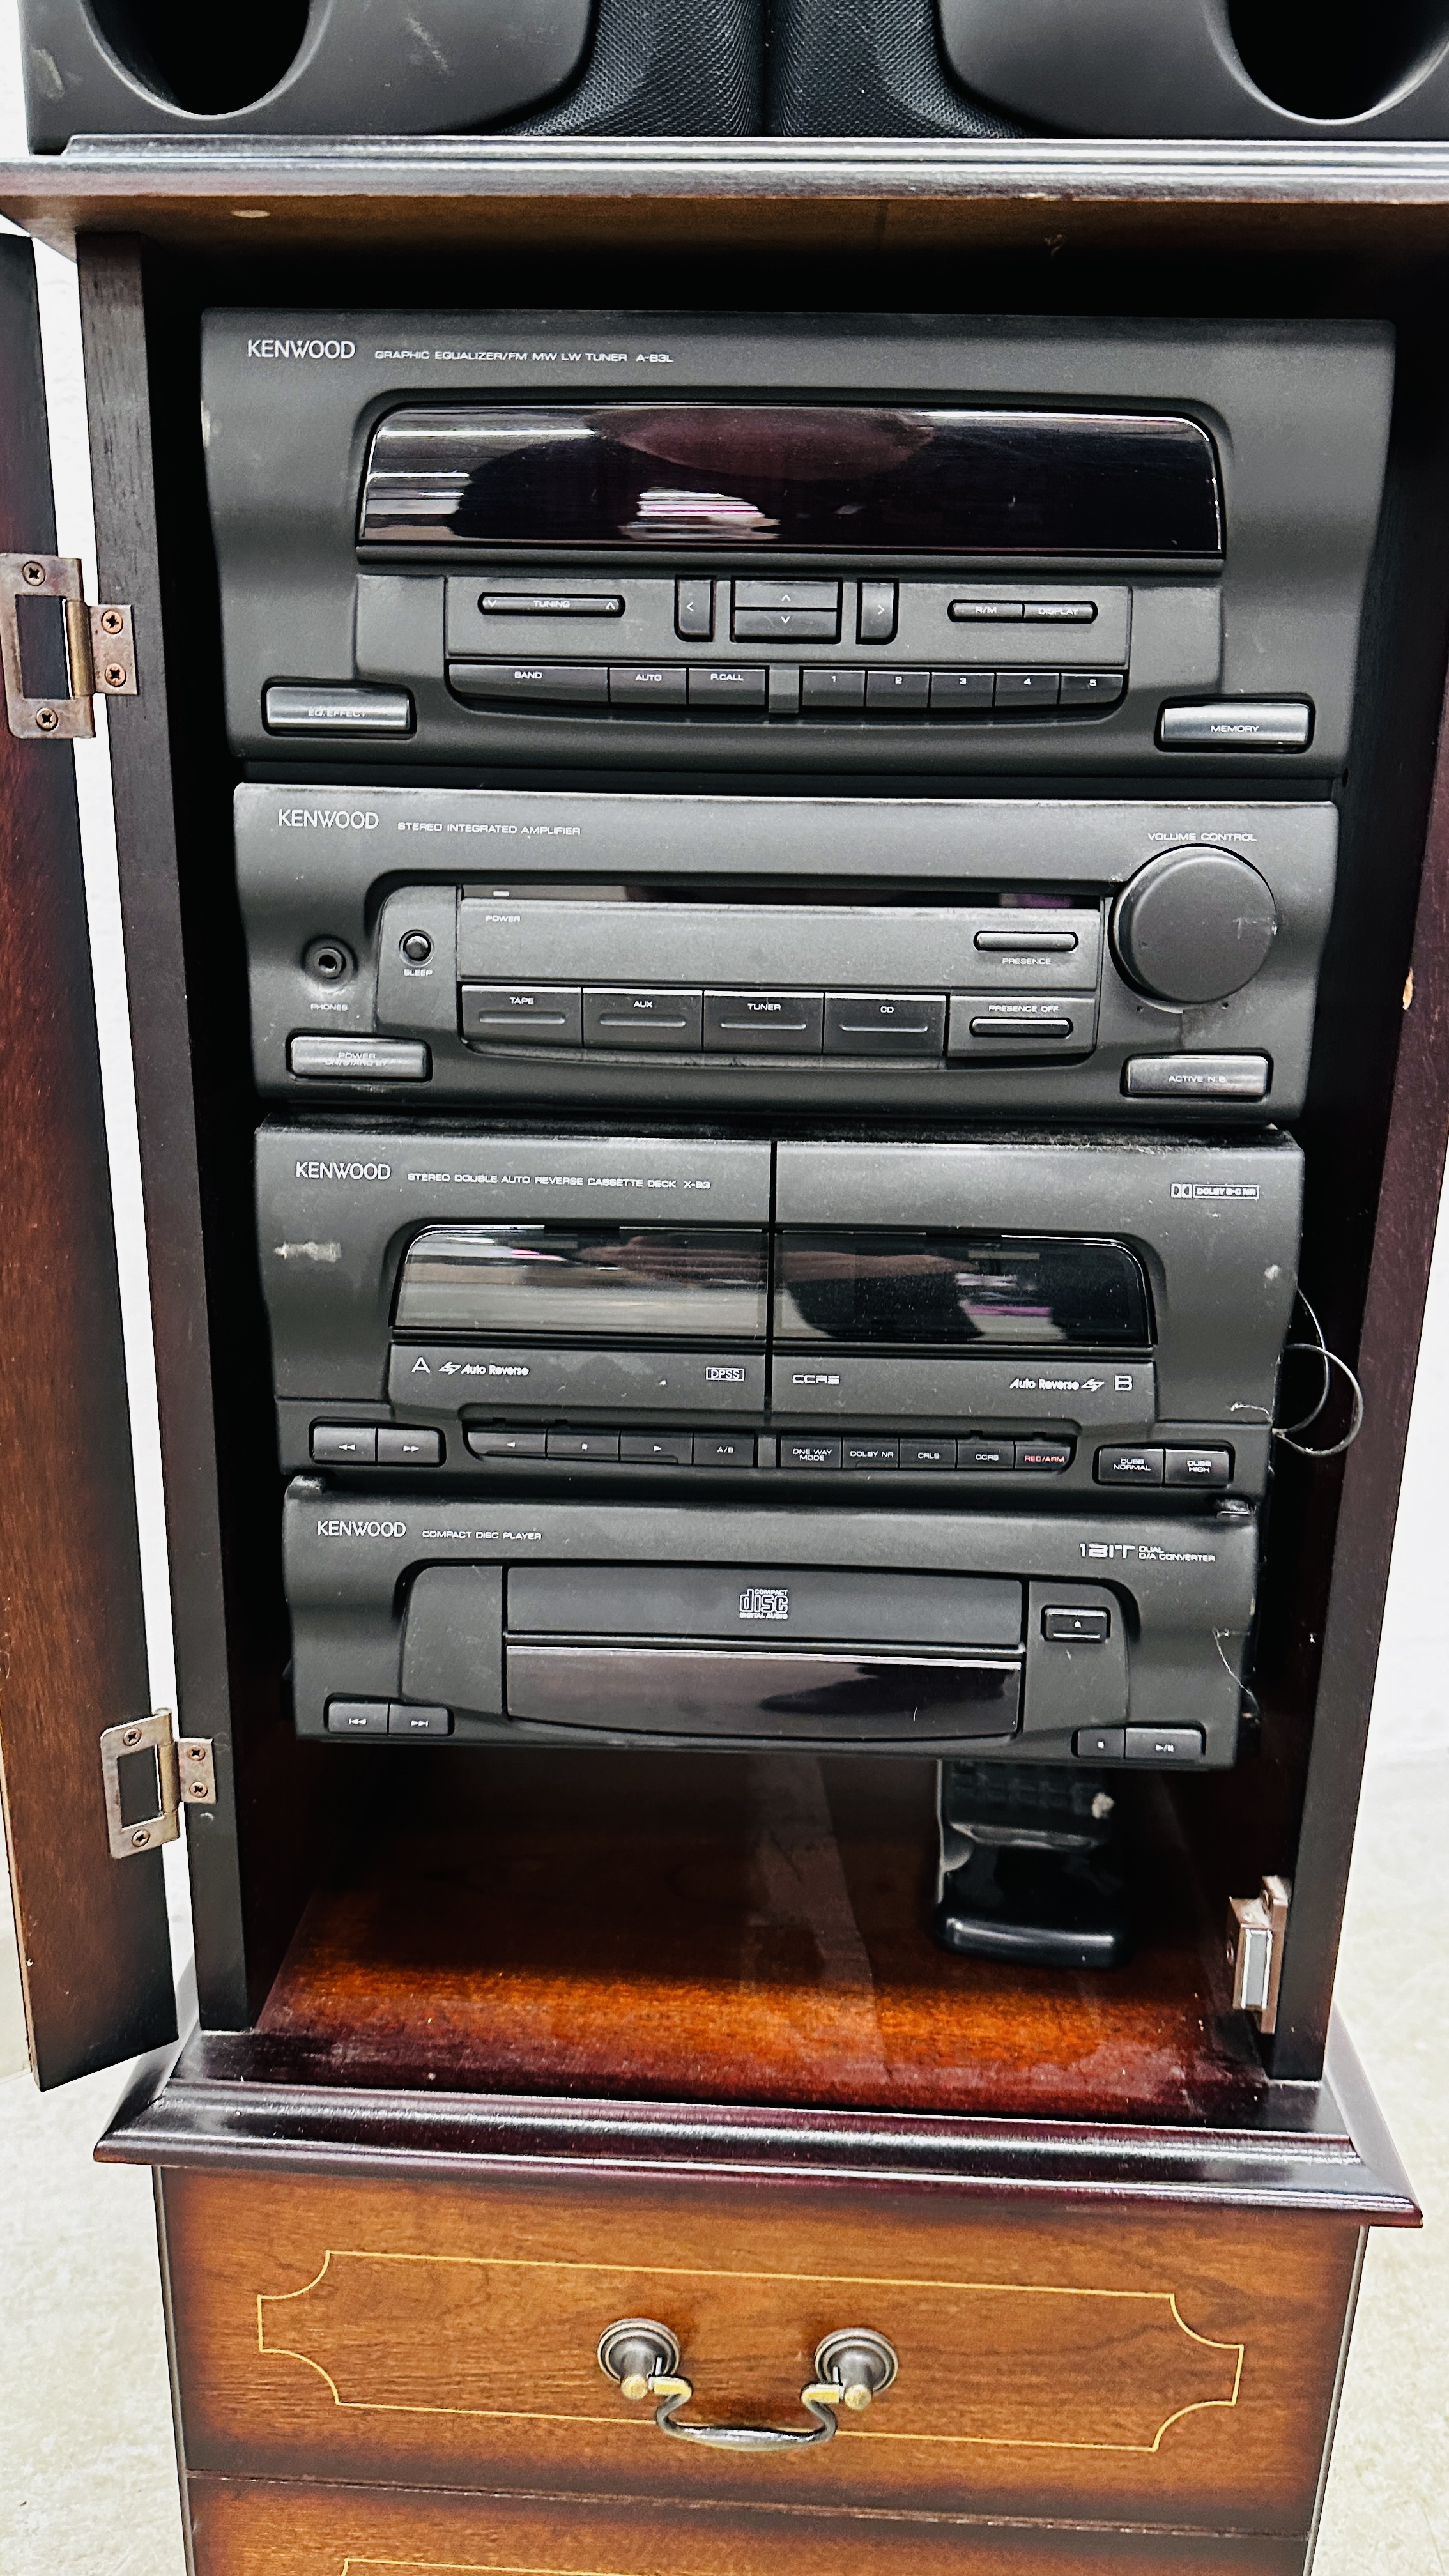 KENWOOD MIDI HI-FI SYSTEM IN CABINET COMPLETE WITH LOUDSPEAKERS, - Image 2 of 5